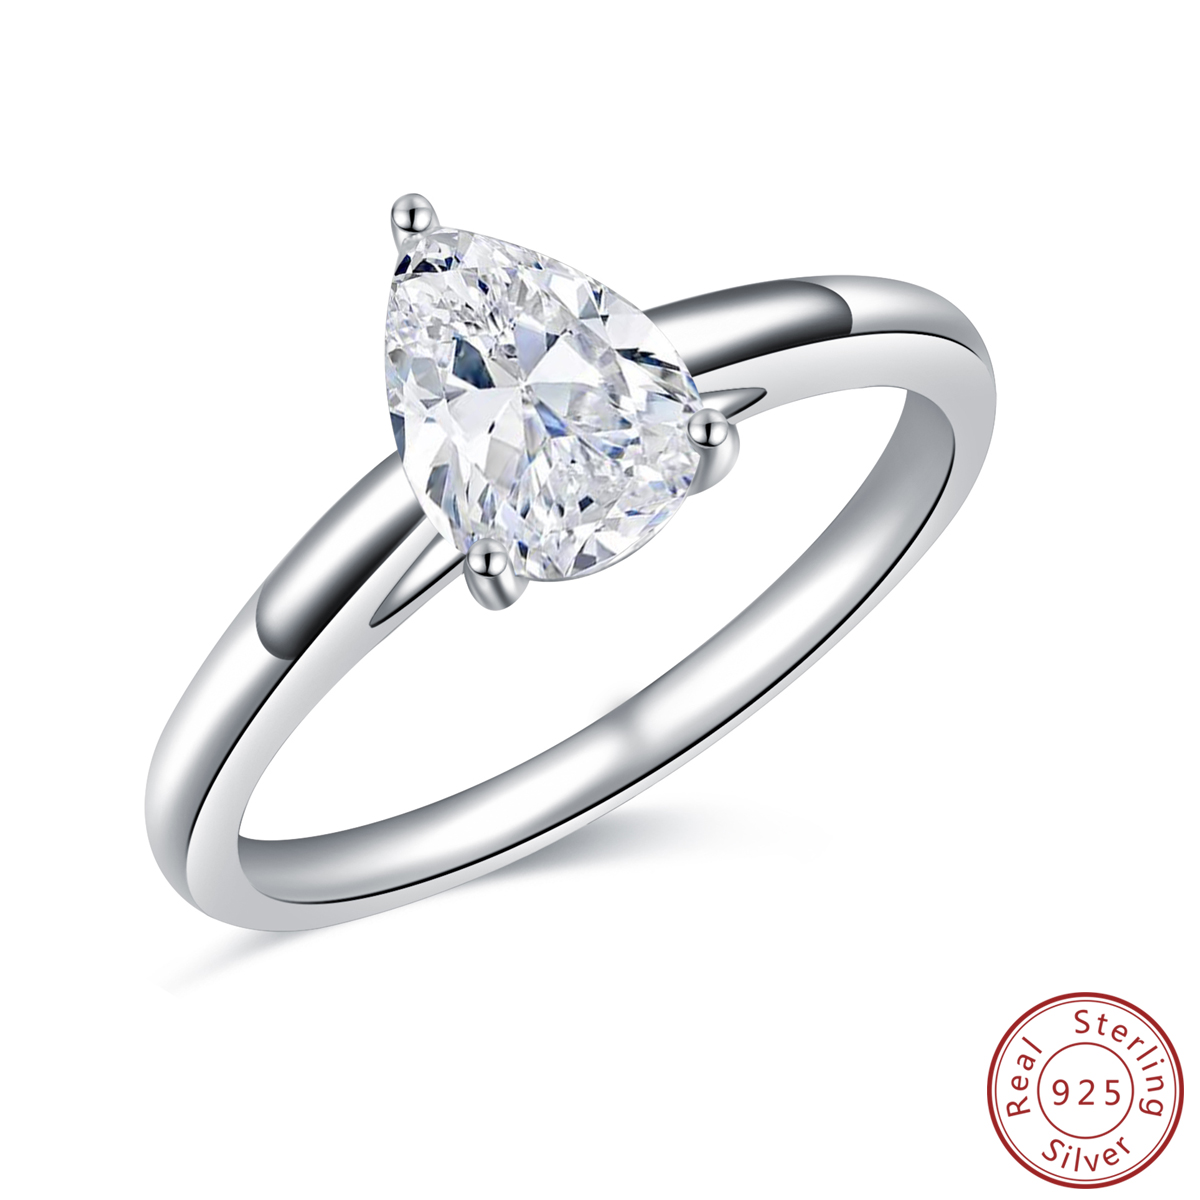 The Timo - CiciColor S925 Sterling Silver Engagement Moissanite Rings